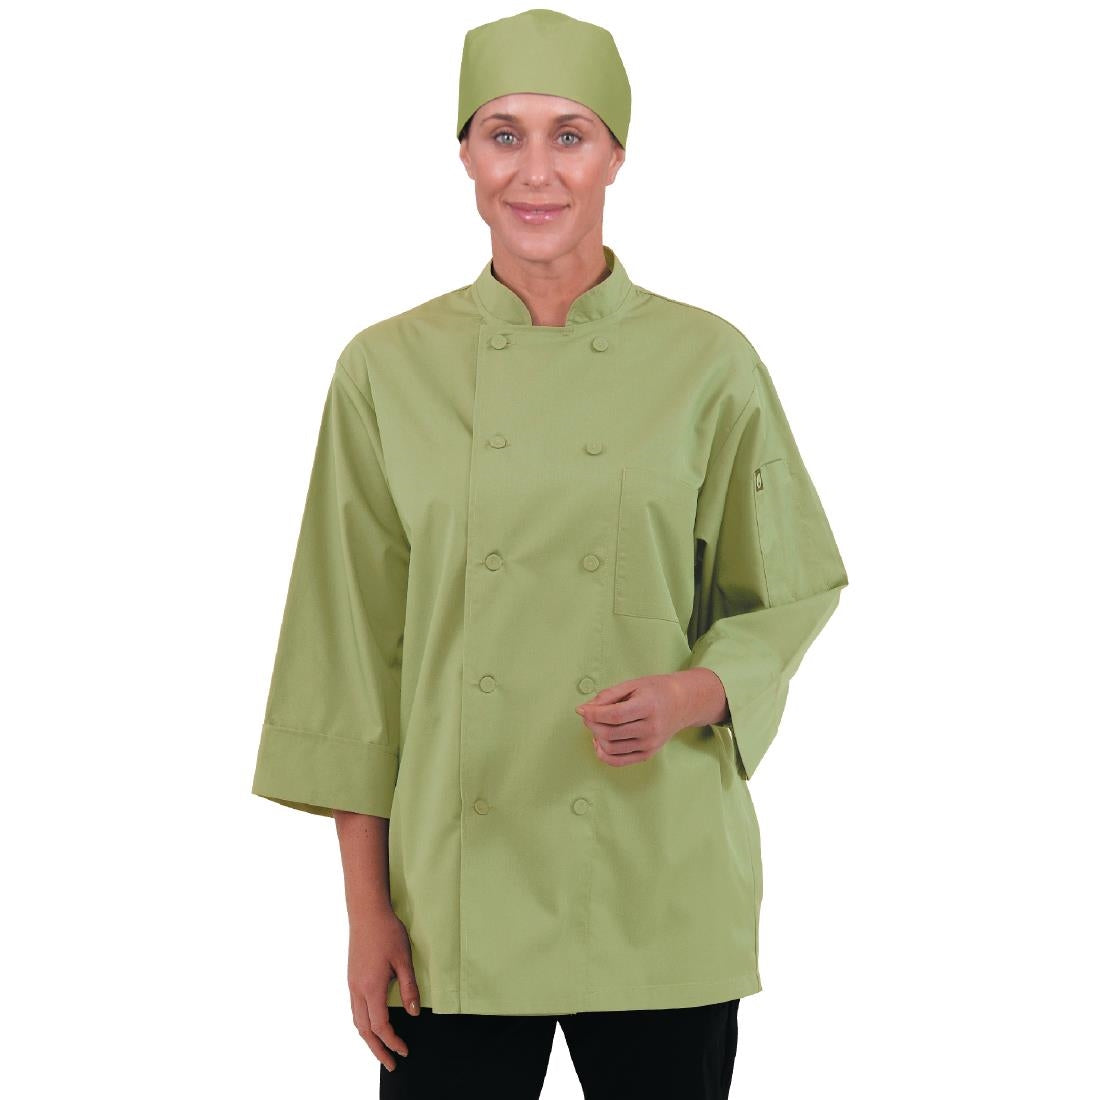 B107-M Chef Works Unisex Chefs Jacket Lime M JD Catering Equipment Solutions Ltd